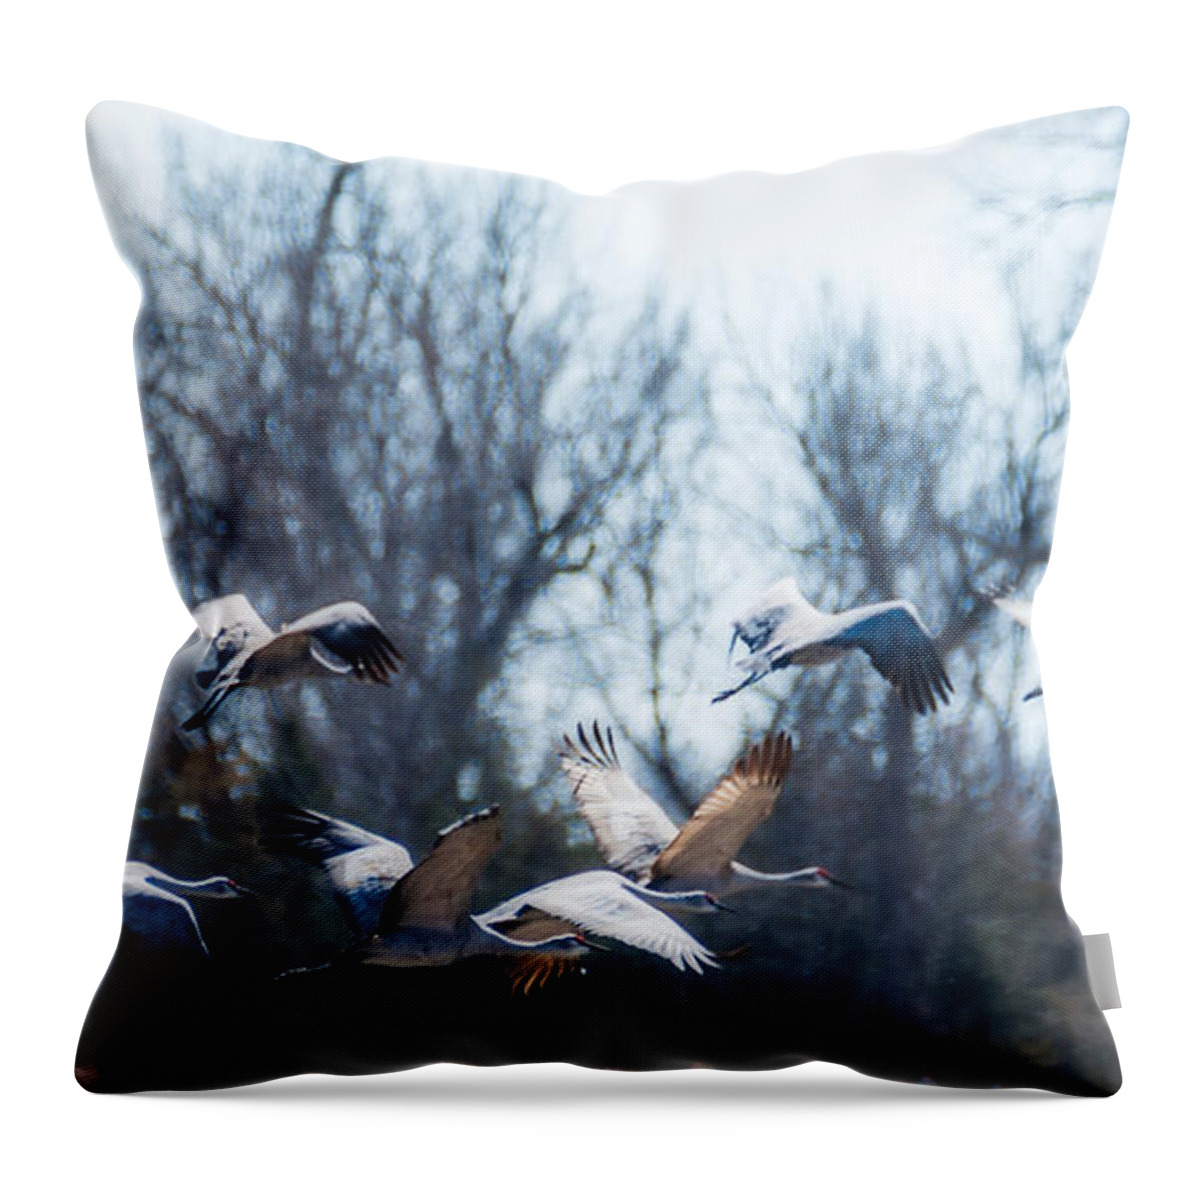 Sandhill Crane Throw Pillow featuring the photograph Sandhill Crane In Flight by Ed Peterson